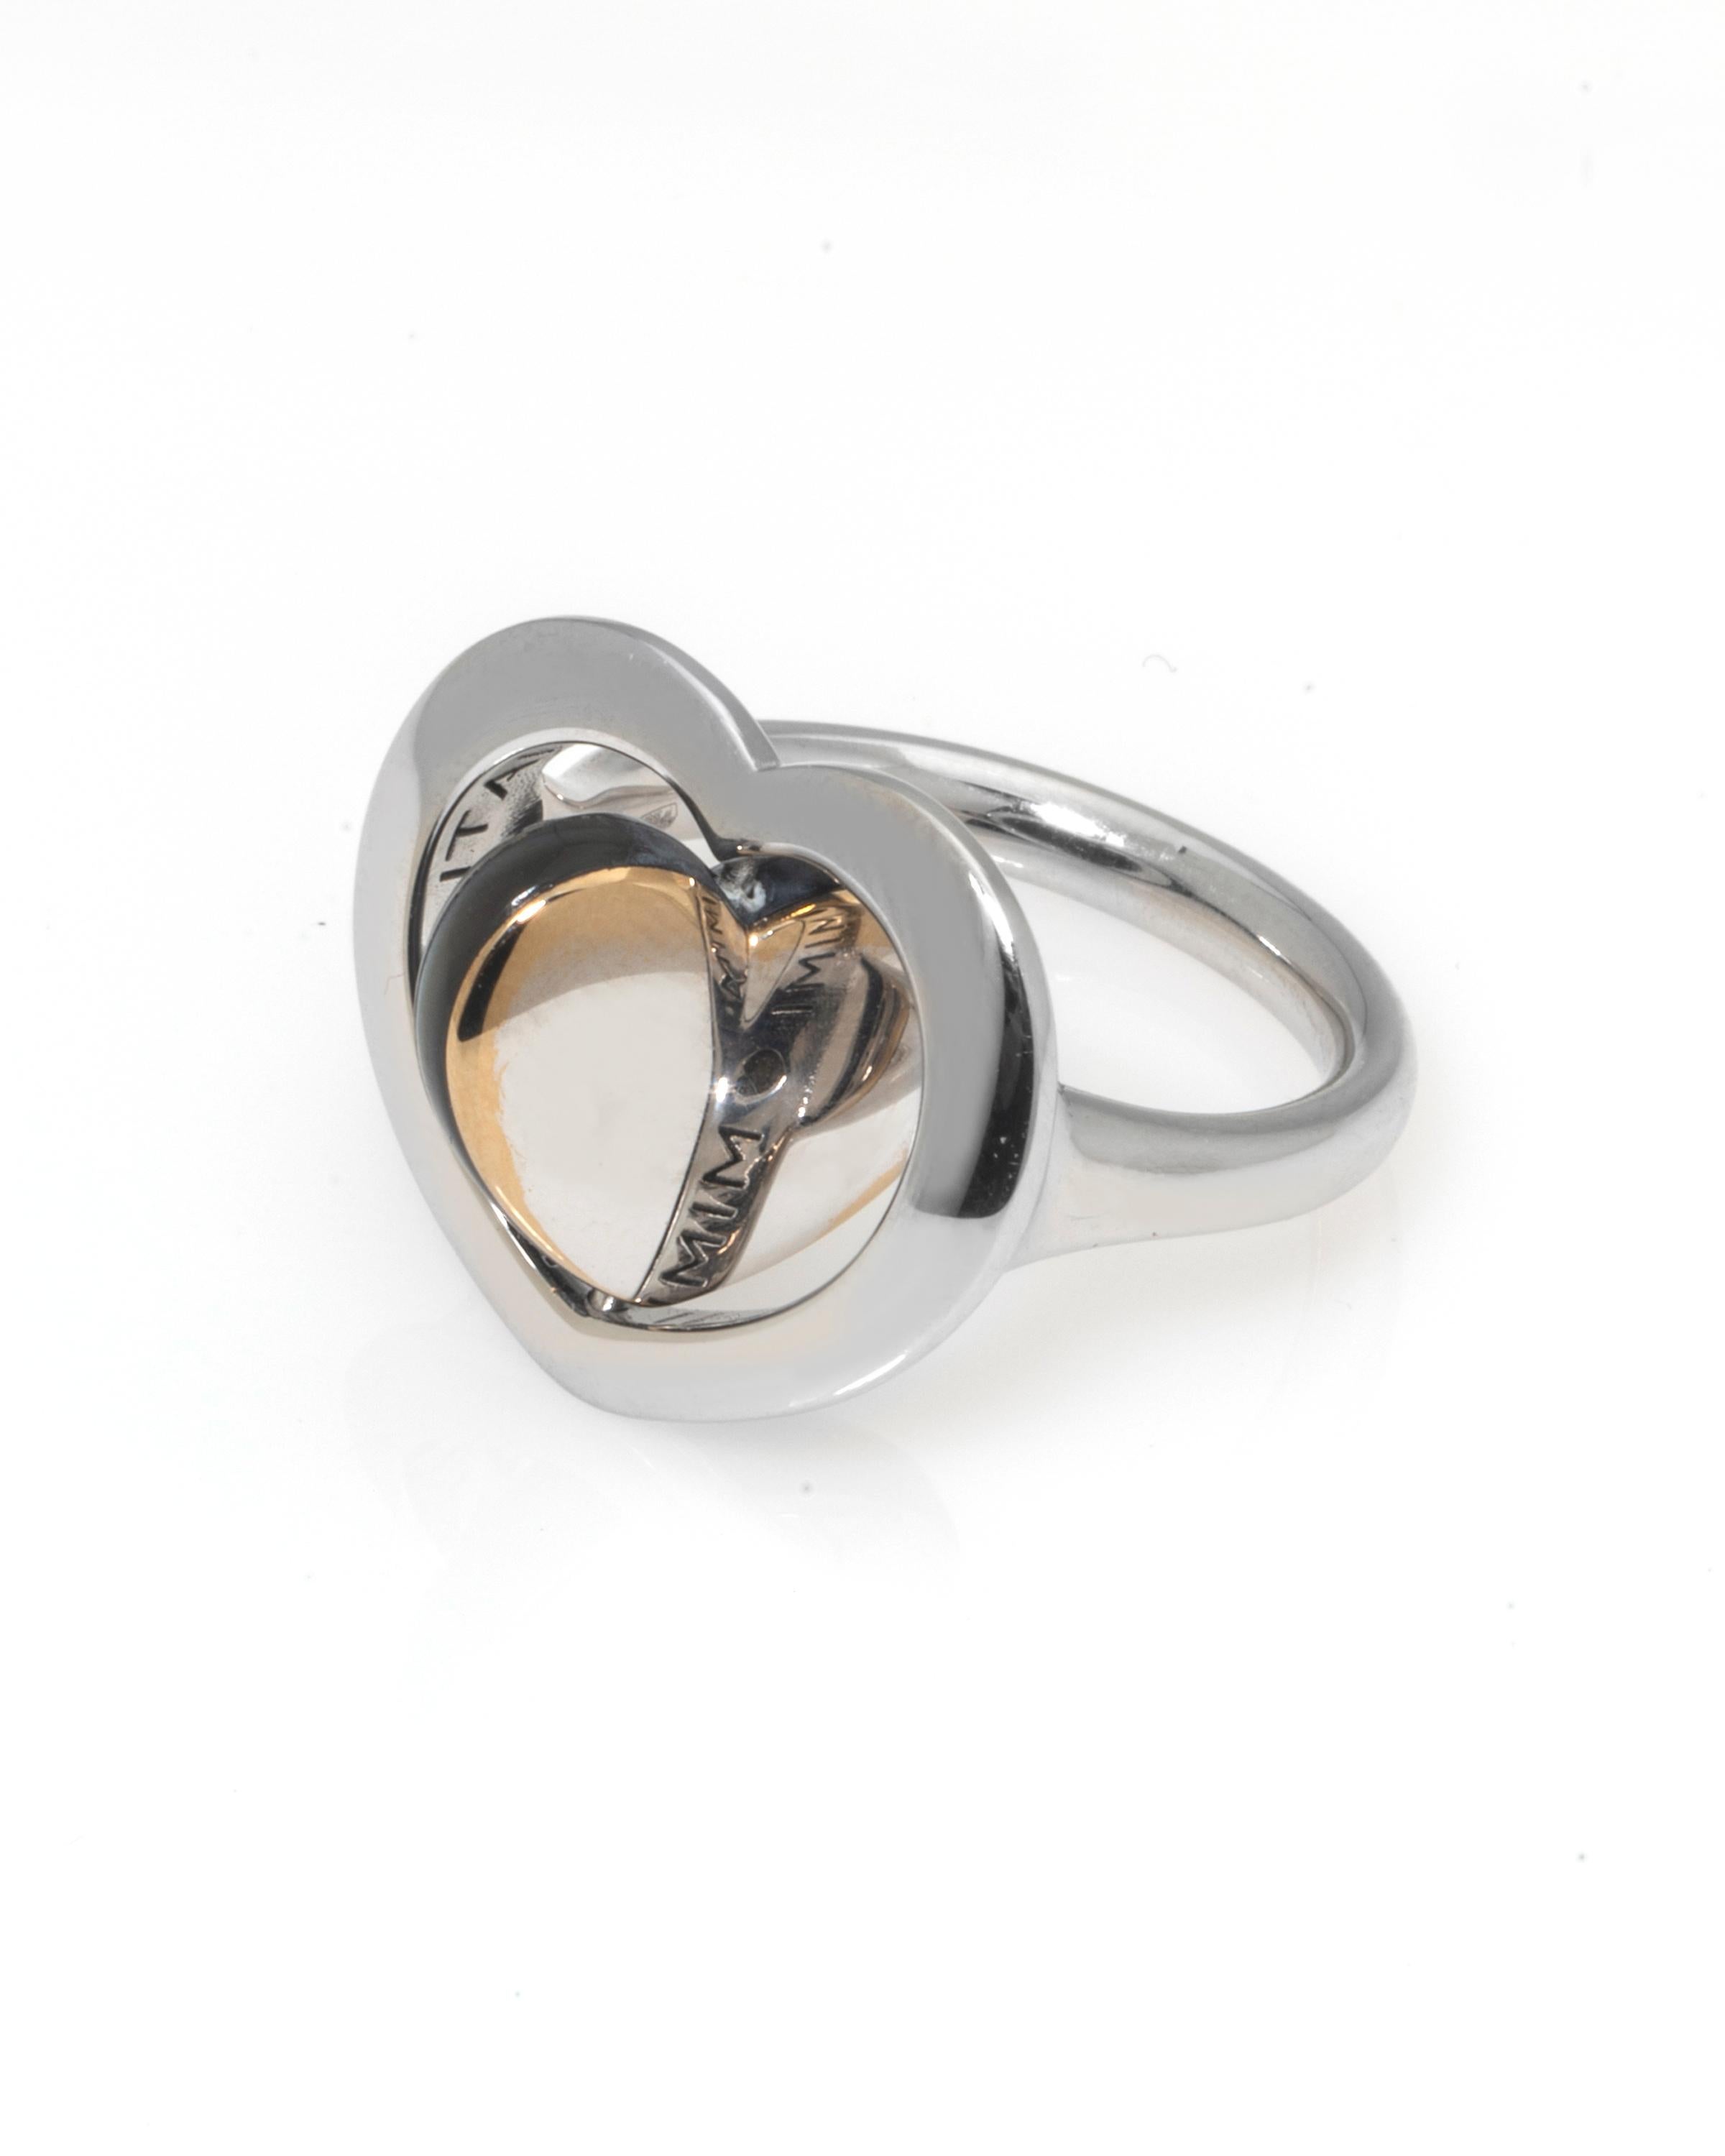 Contemporary Mimi Milano 18K White Gold, Onyx Cocktail Ring sz 6.75 For Sale